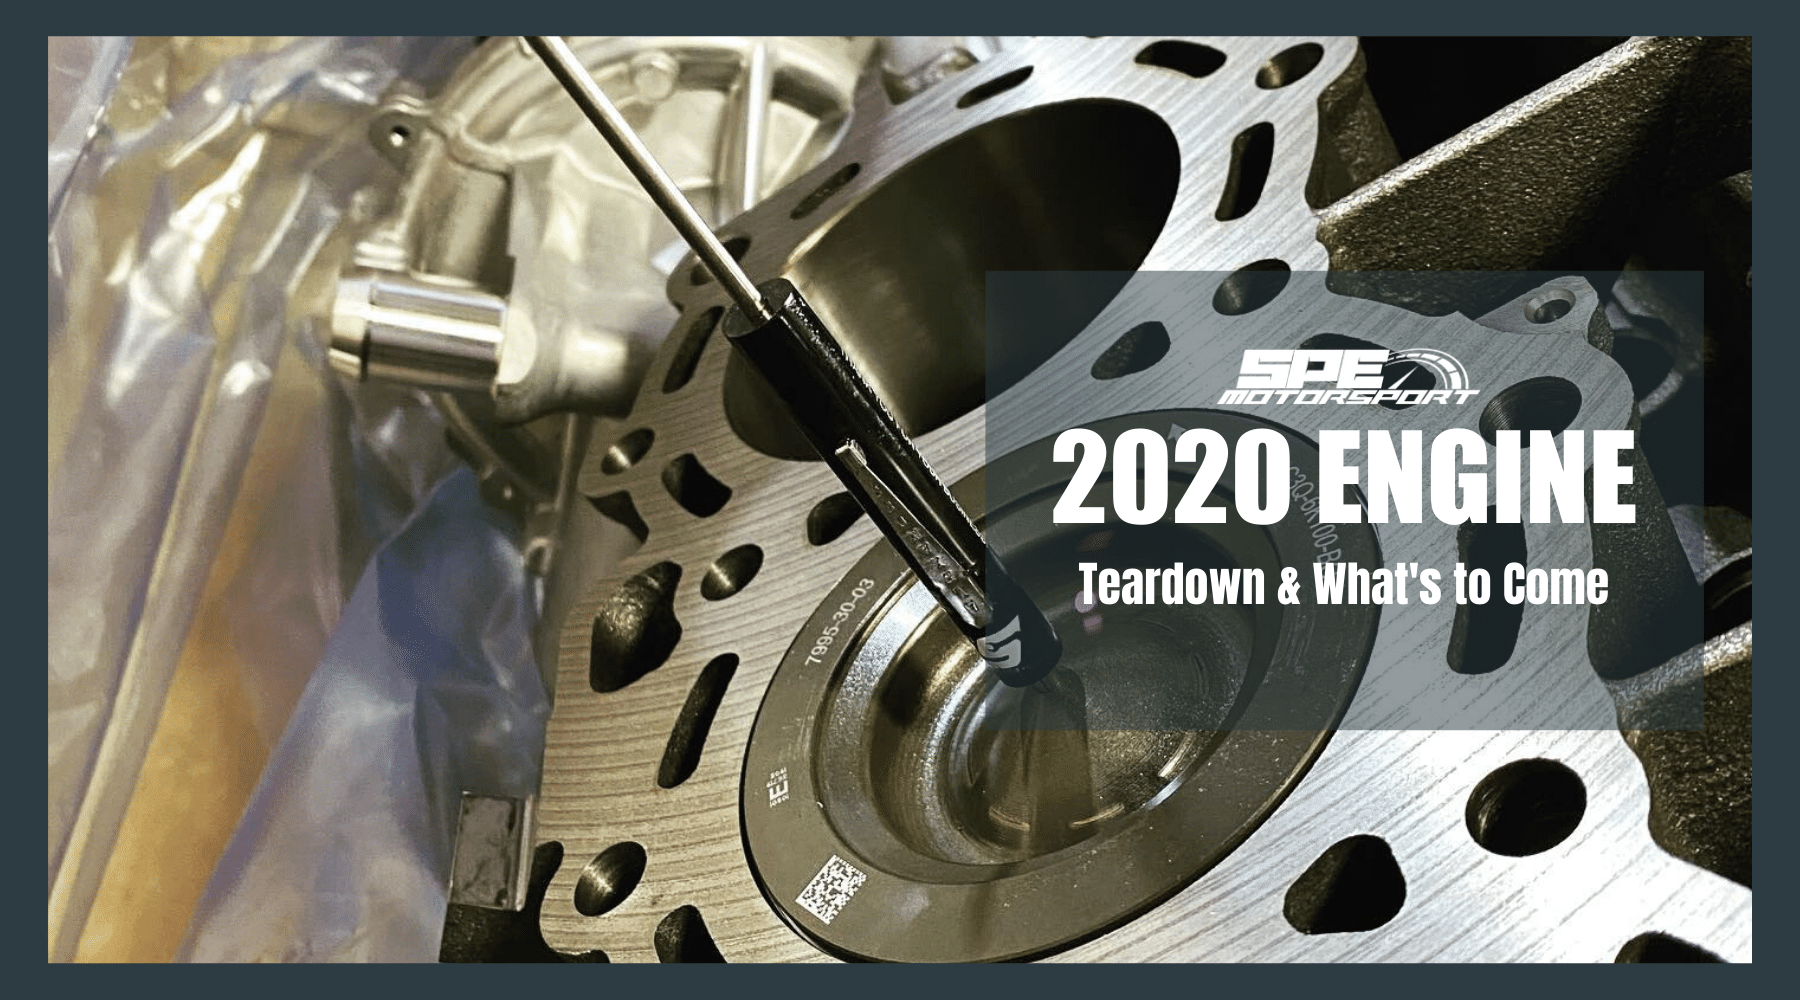 2020 Ford 6.7L, Teardown and What's to Come...